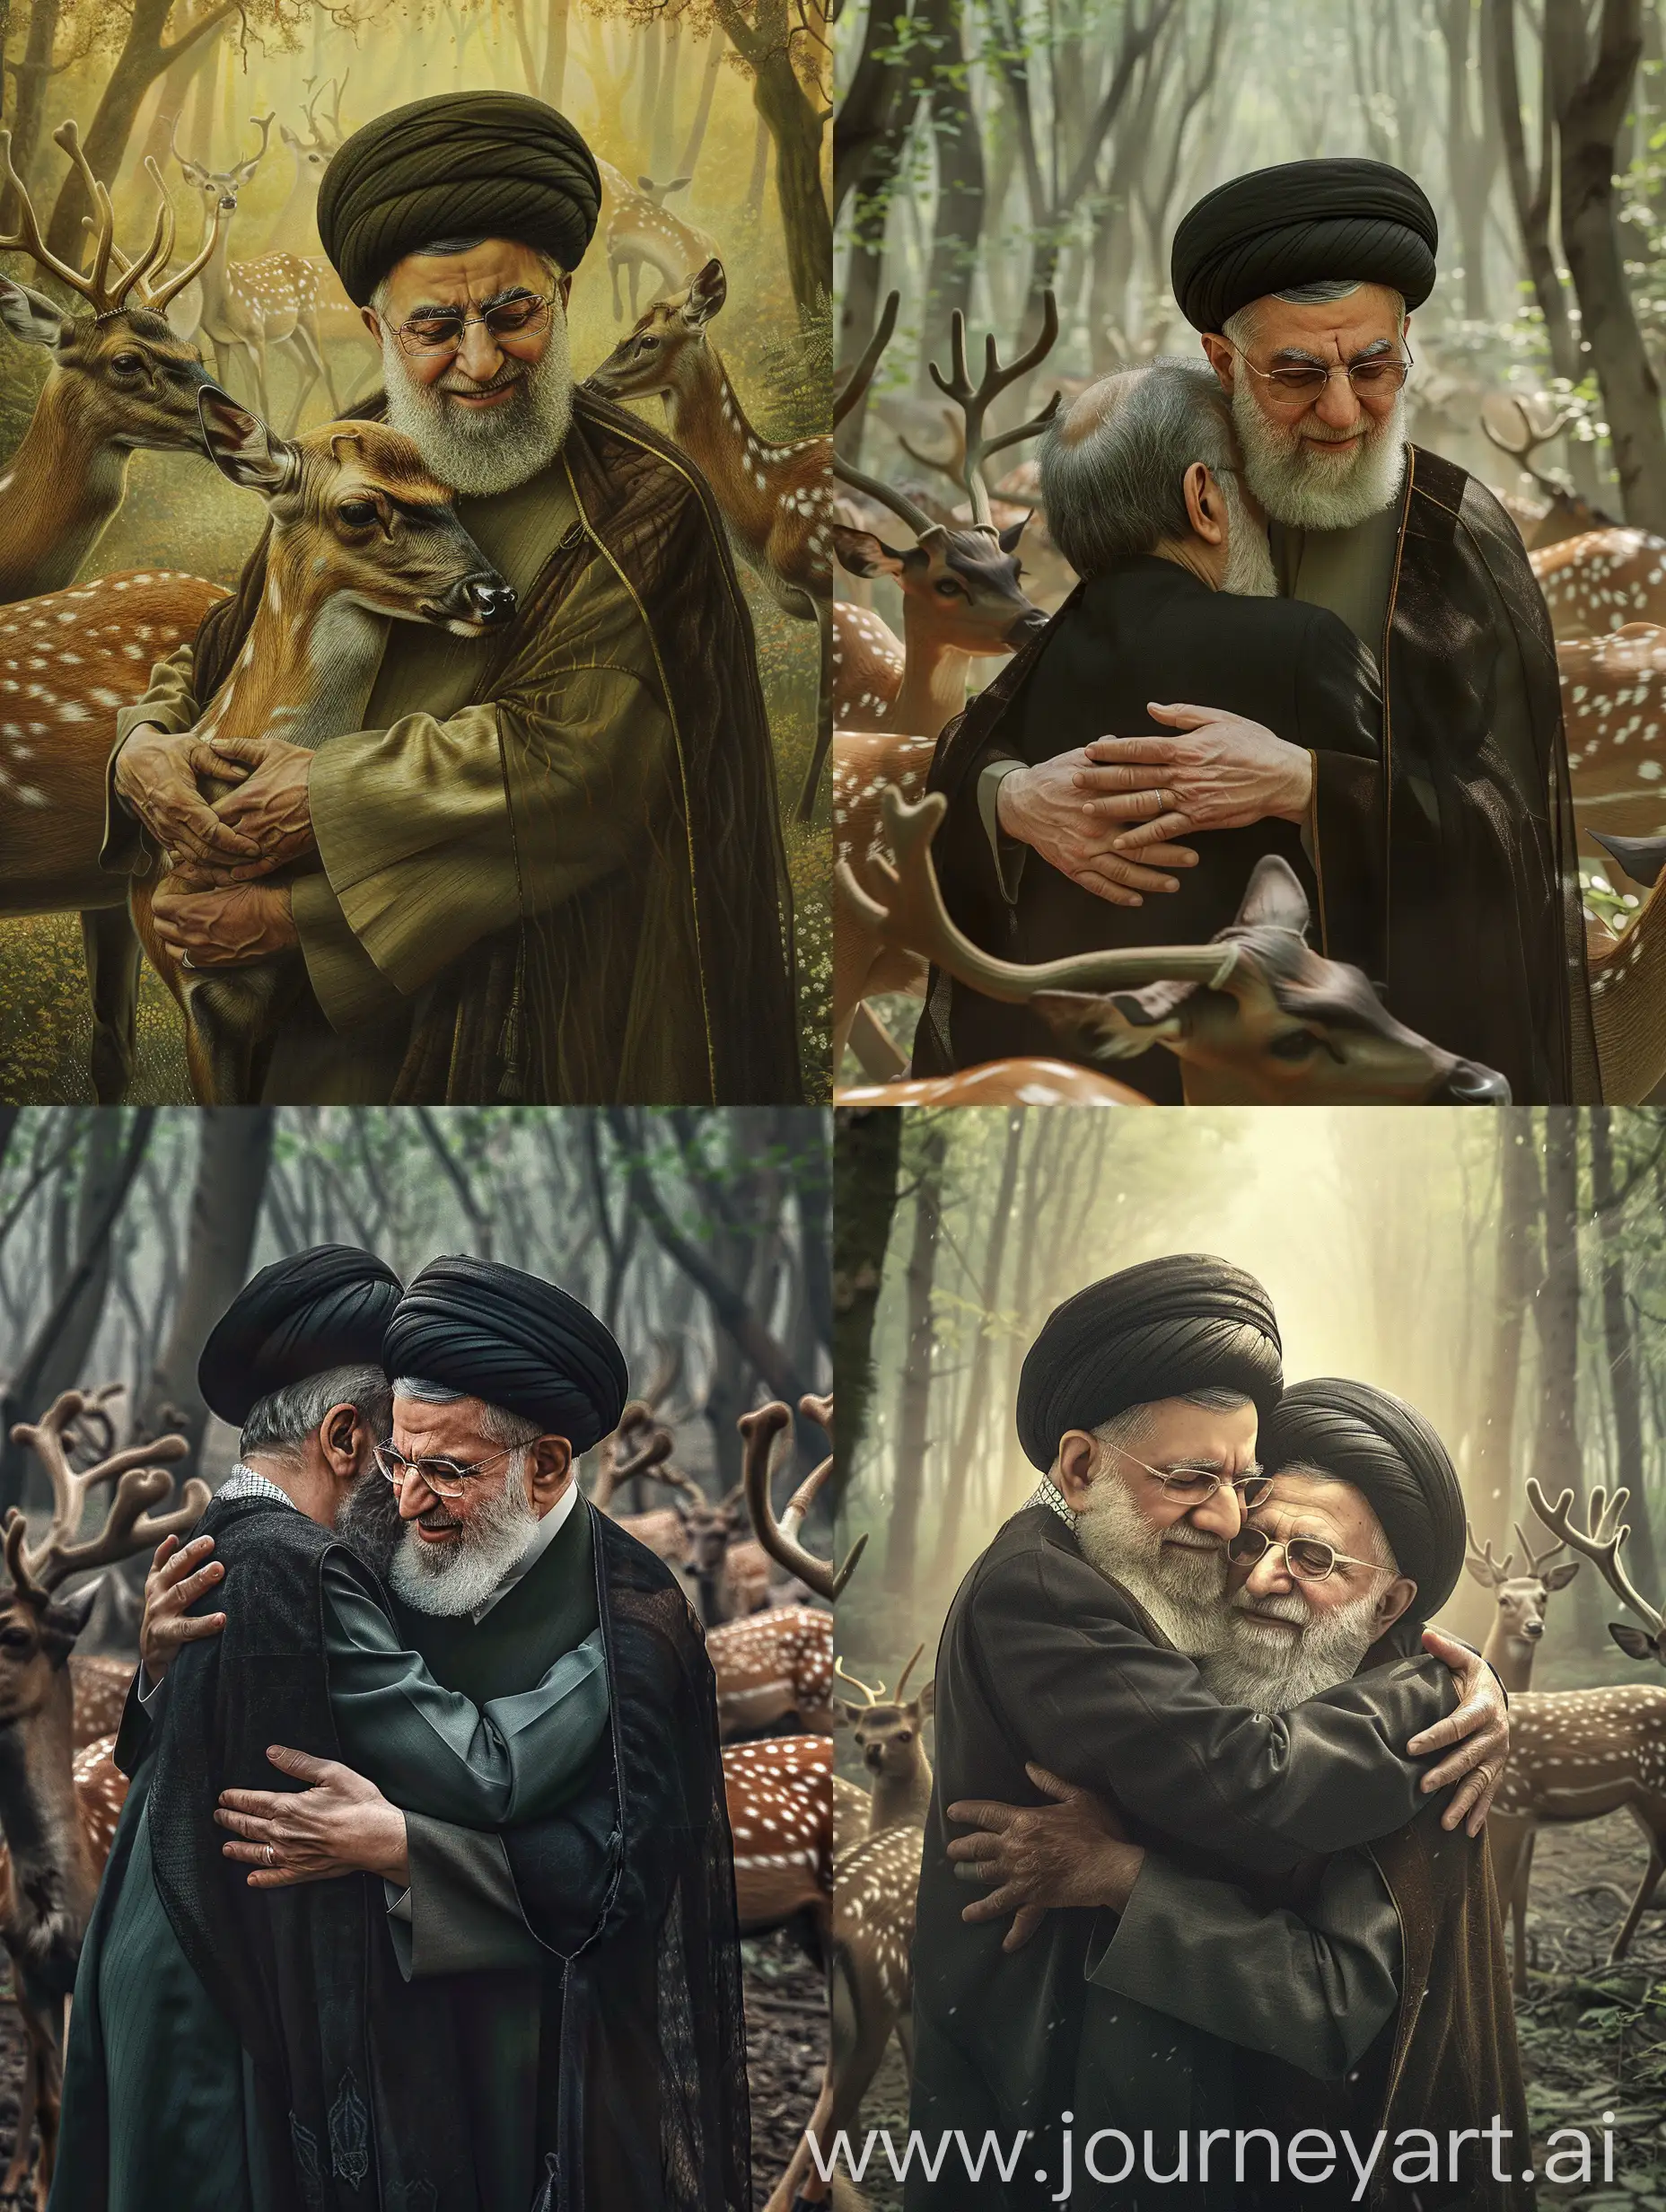 Iran's President, Martyr Ebrahim Raisi, in the embrace of Imam Mahdi, who has a radiant face, in a serene and simple forest surrounded by deer, in 8K quality with high precision.